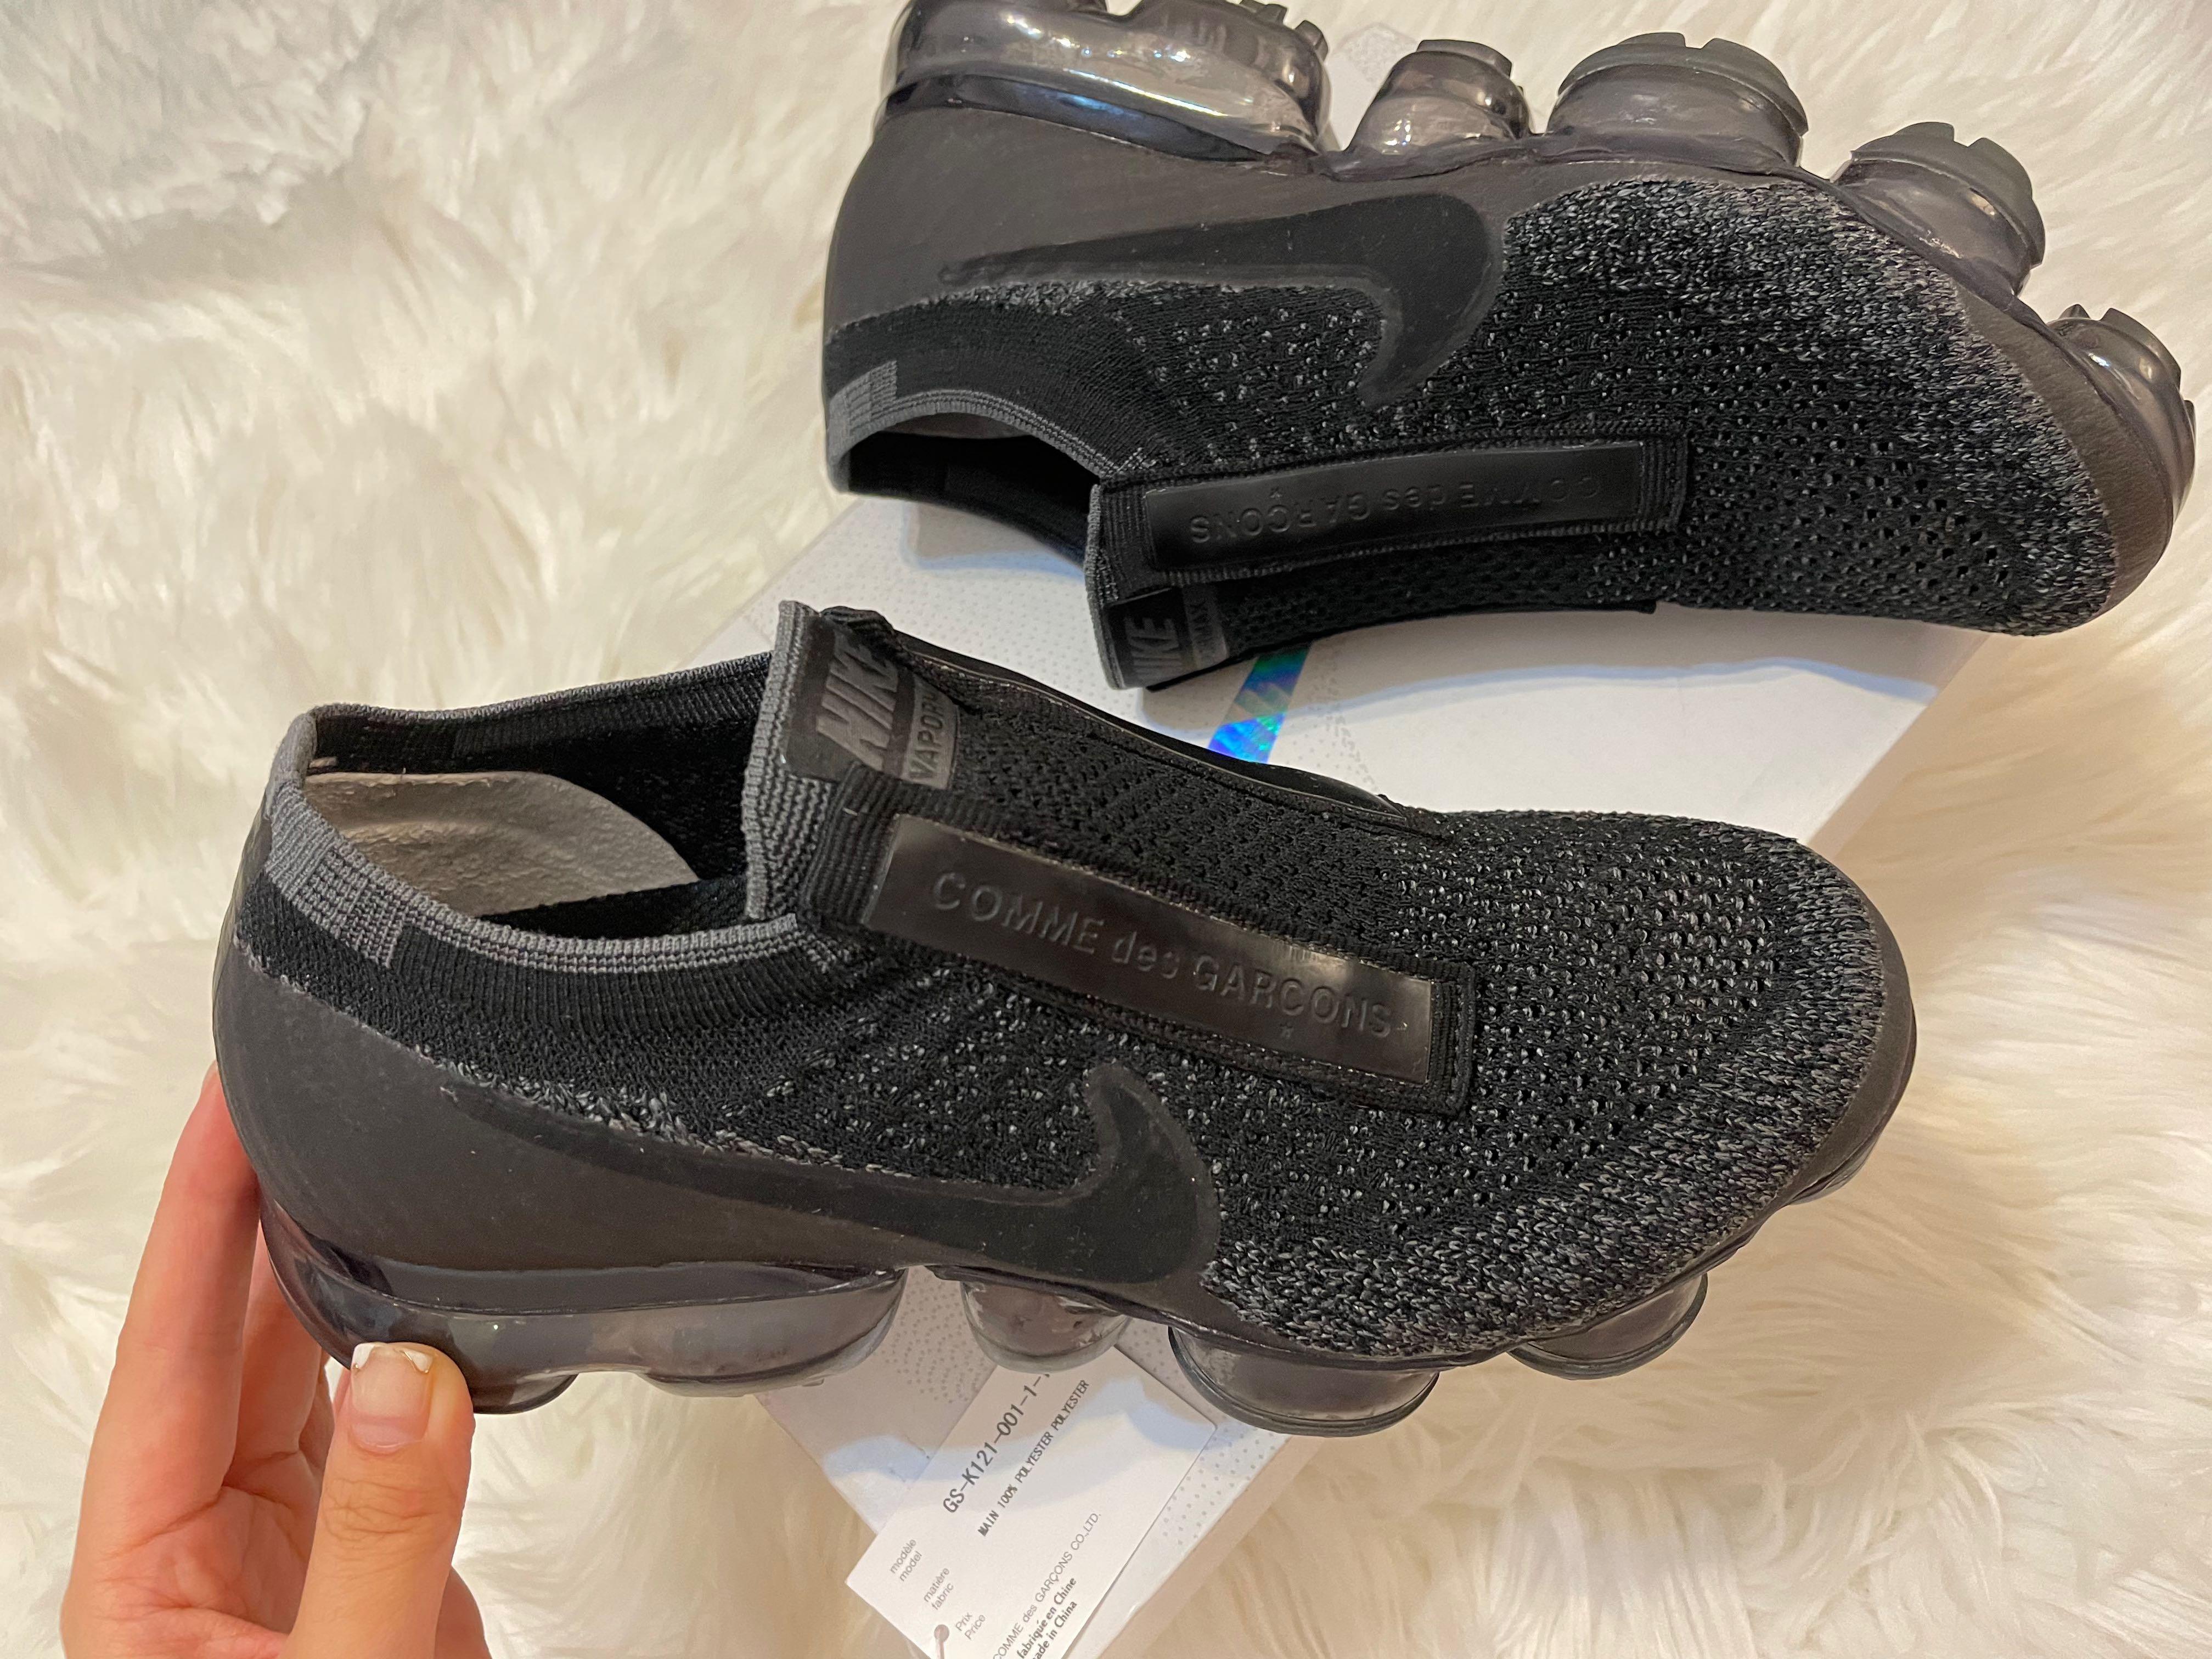 LIMITED EDITION- Comme des Garcons CDG x Nike Air Vapormax